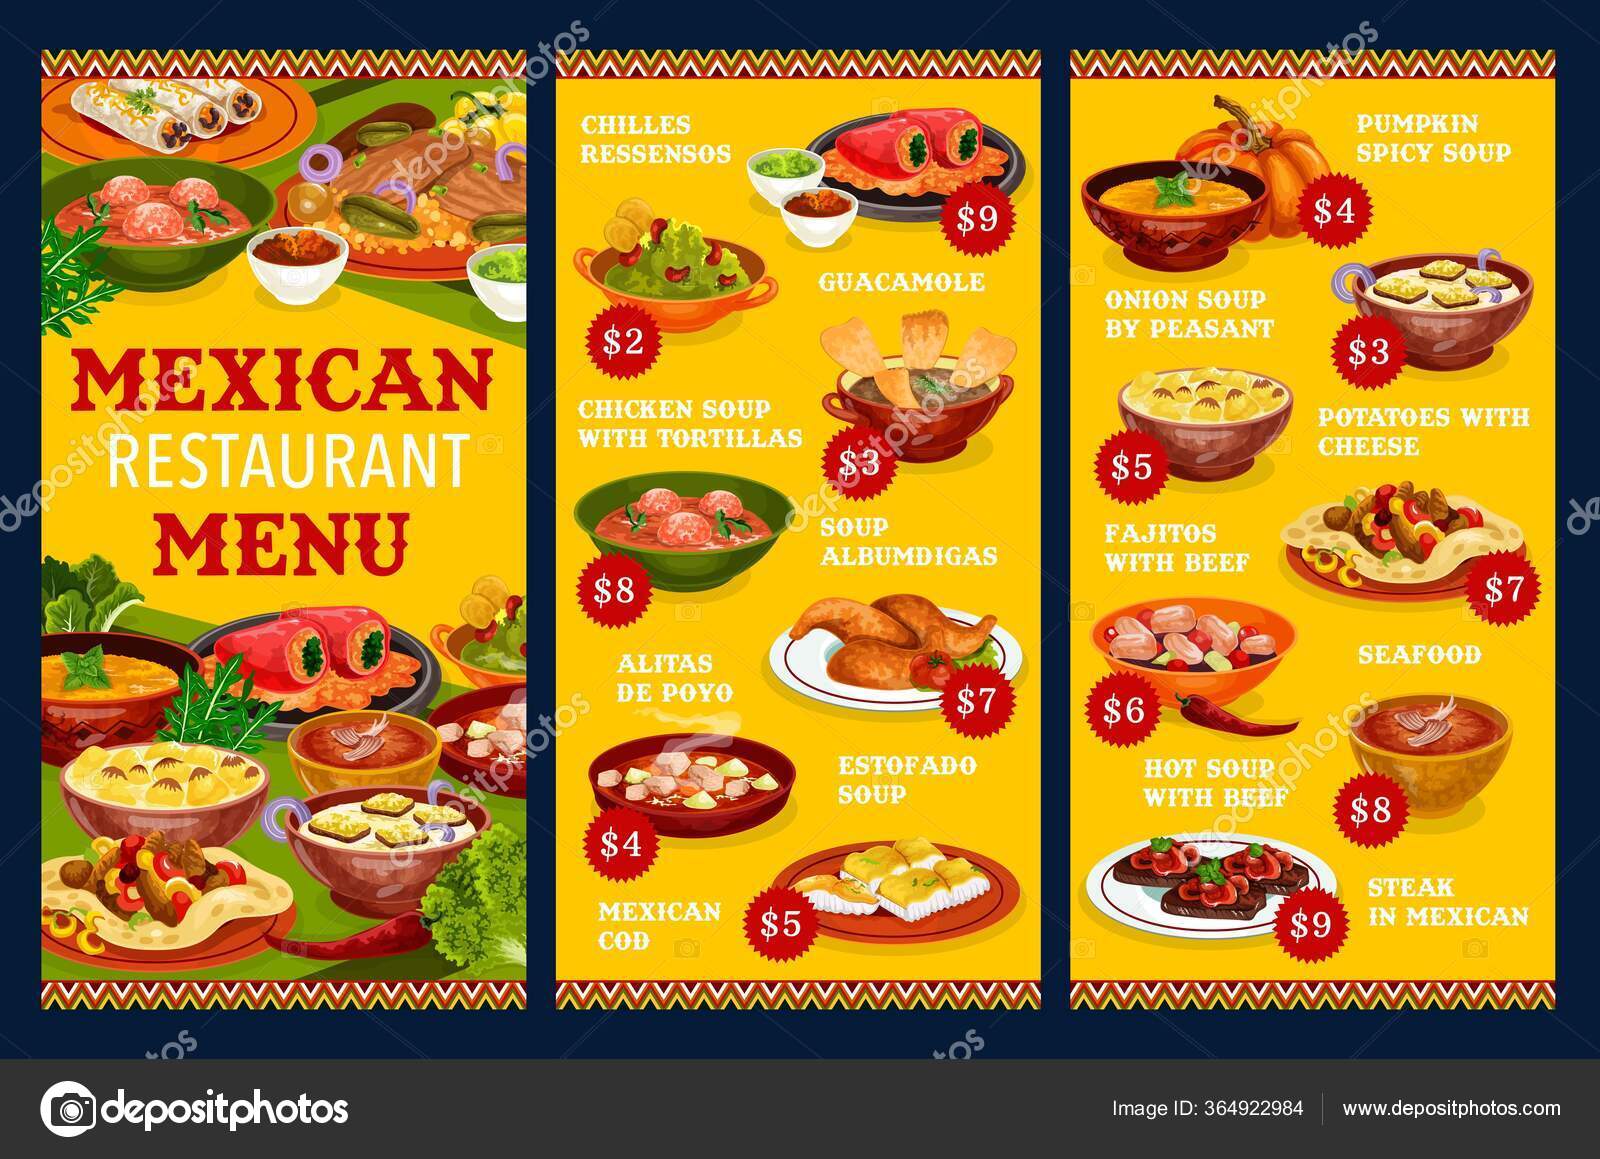 Mexican Restaurant Menu Vector Template Vegetable Meat Fish Dishes Beef ...